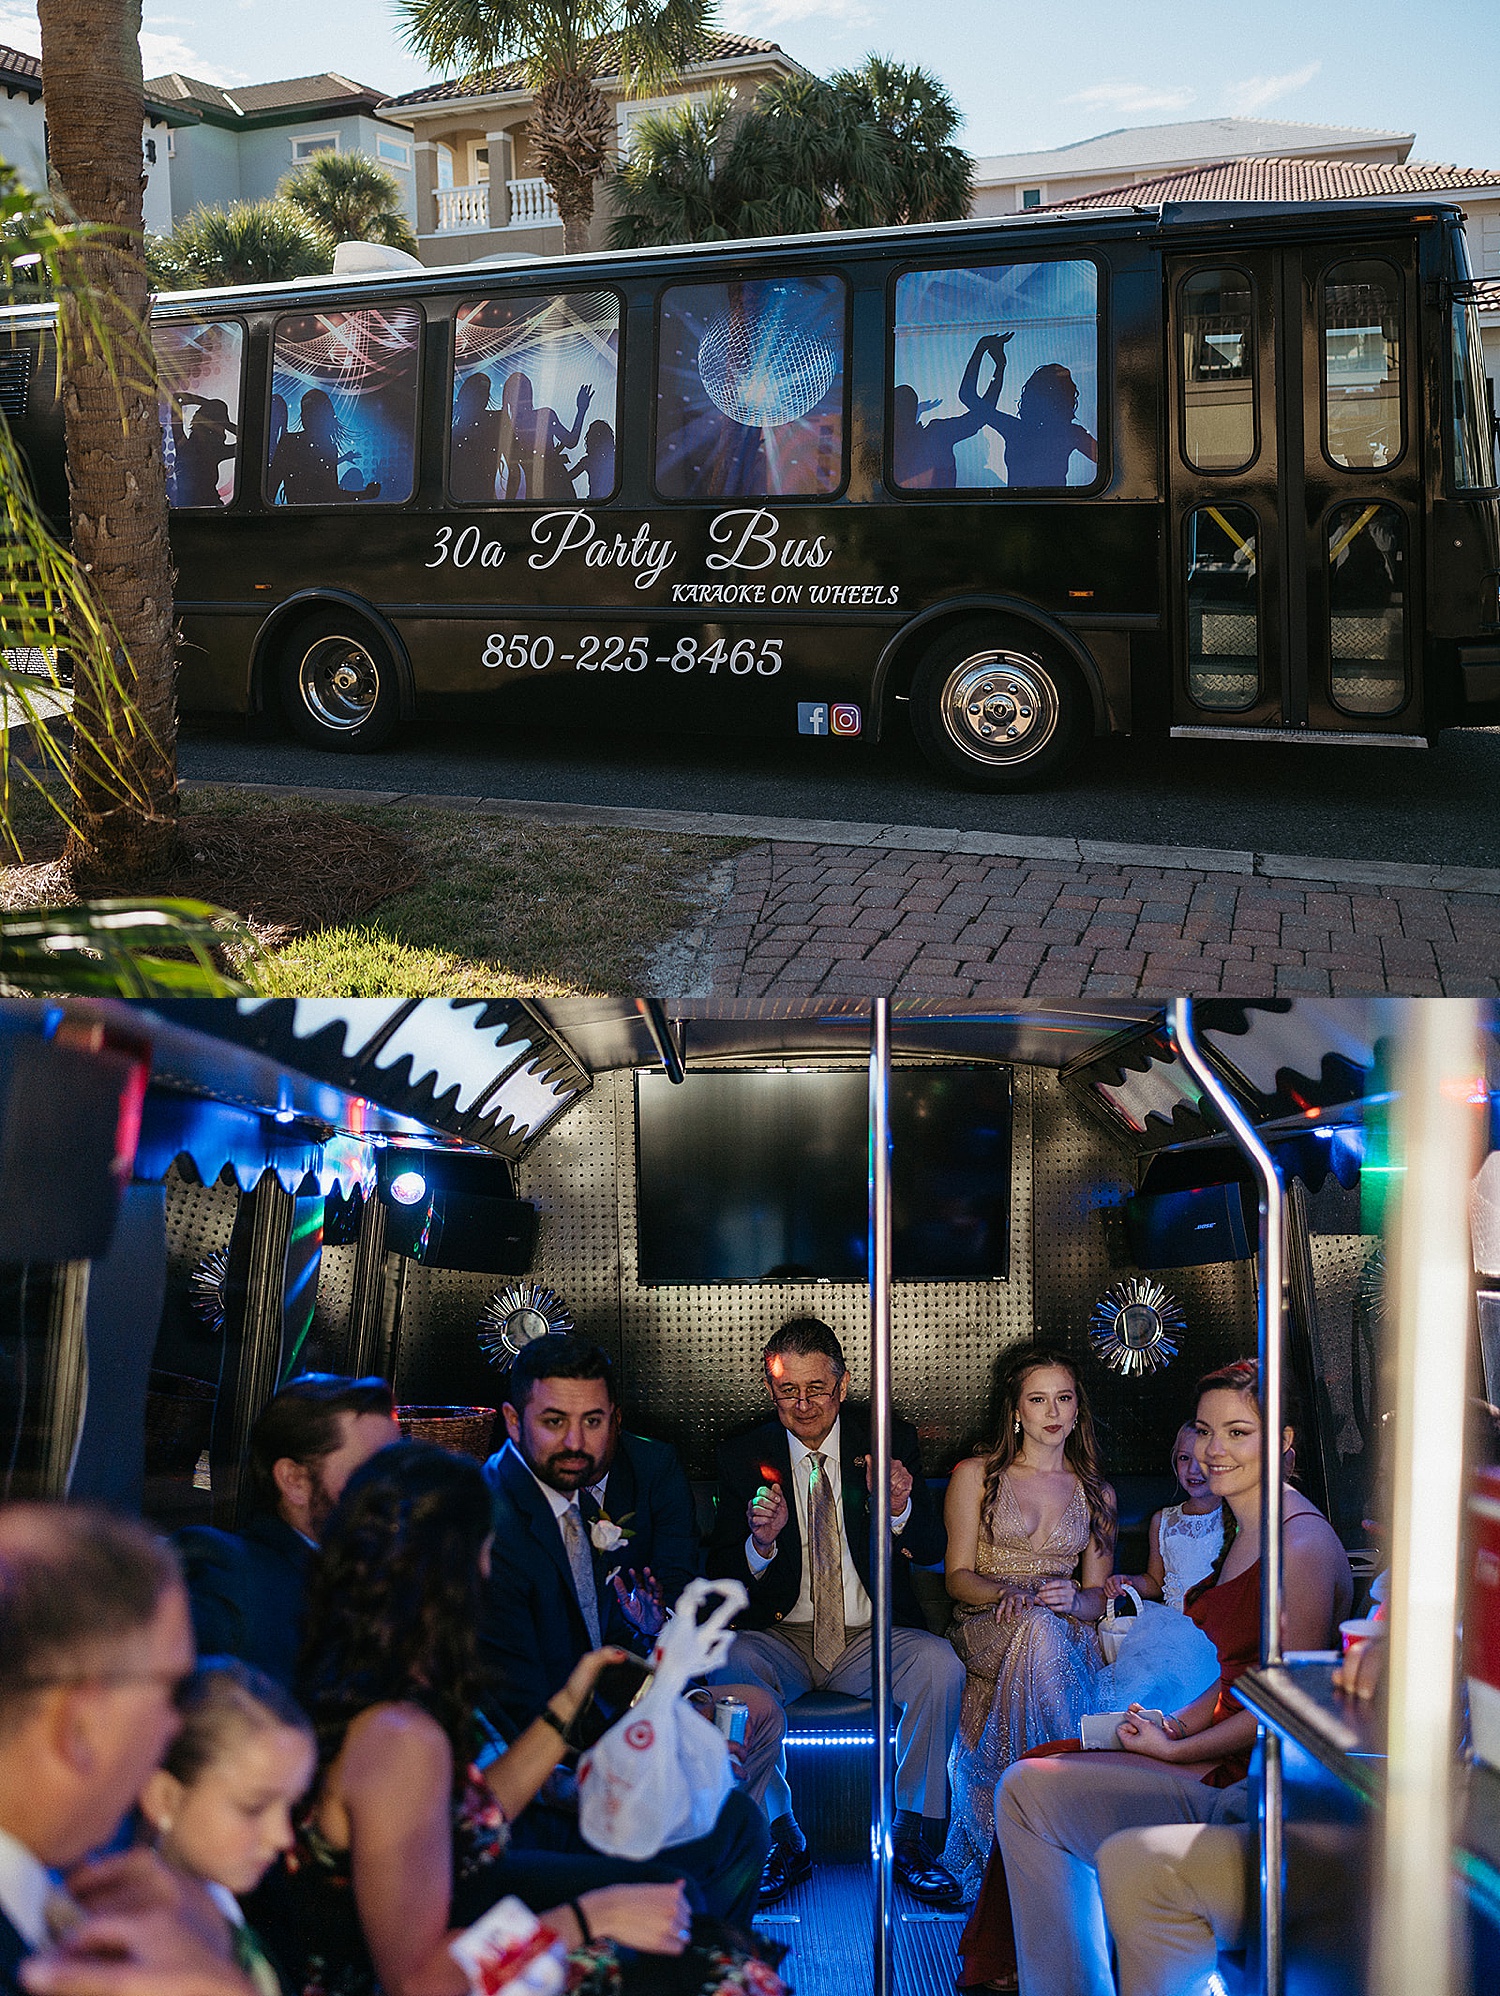 Party bus in 30a takes wedding guests to ceremony location